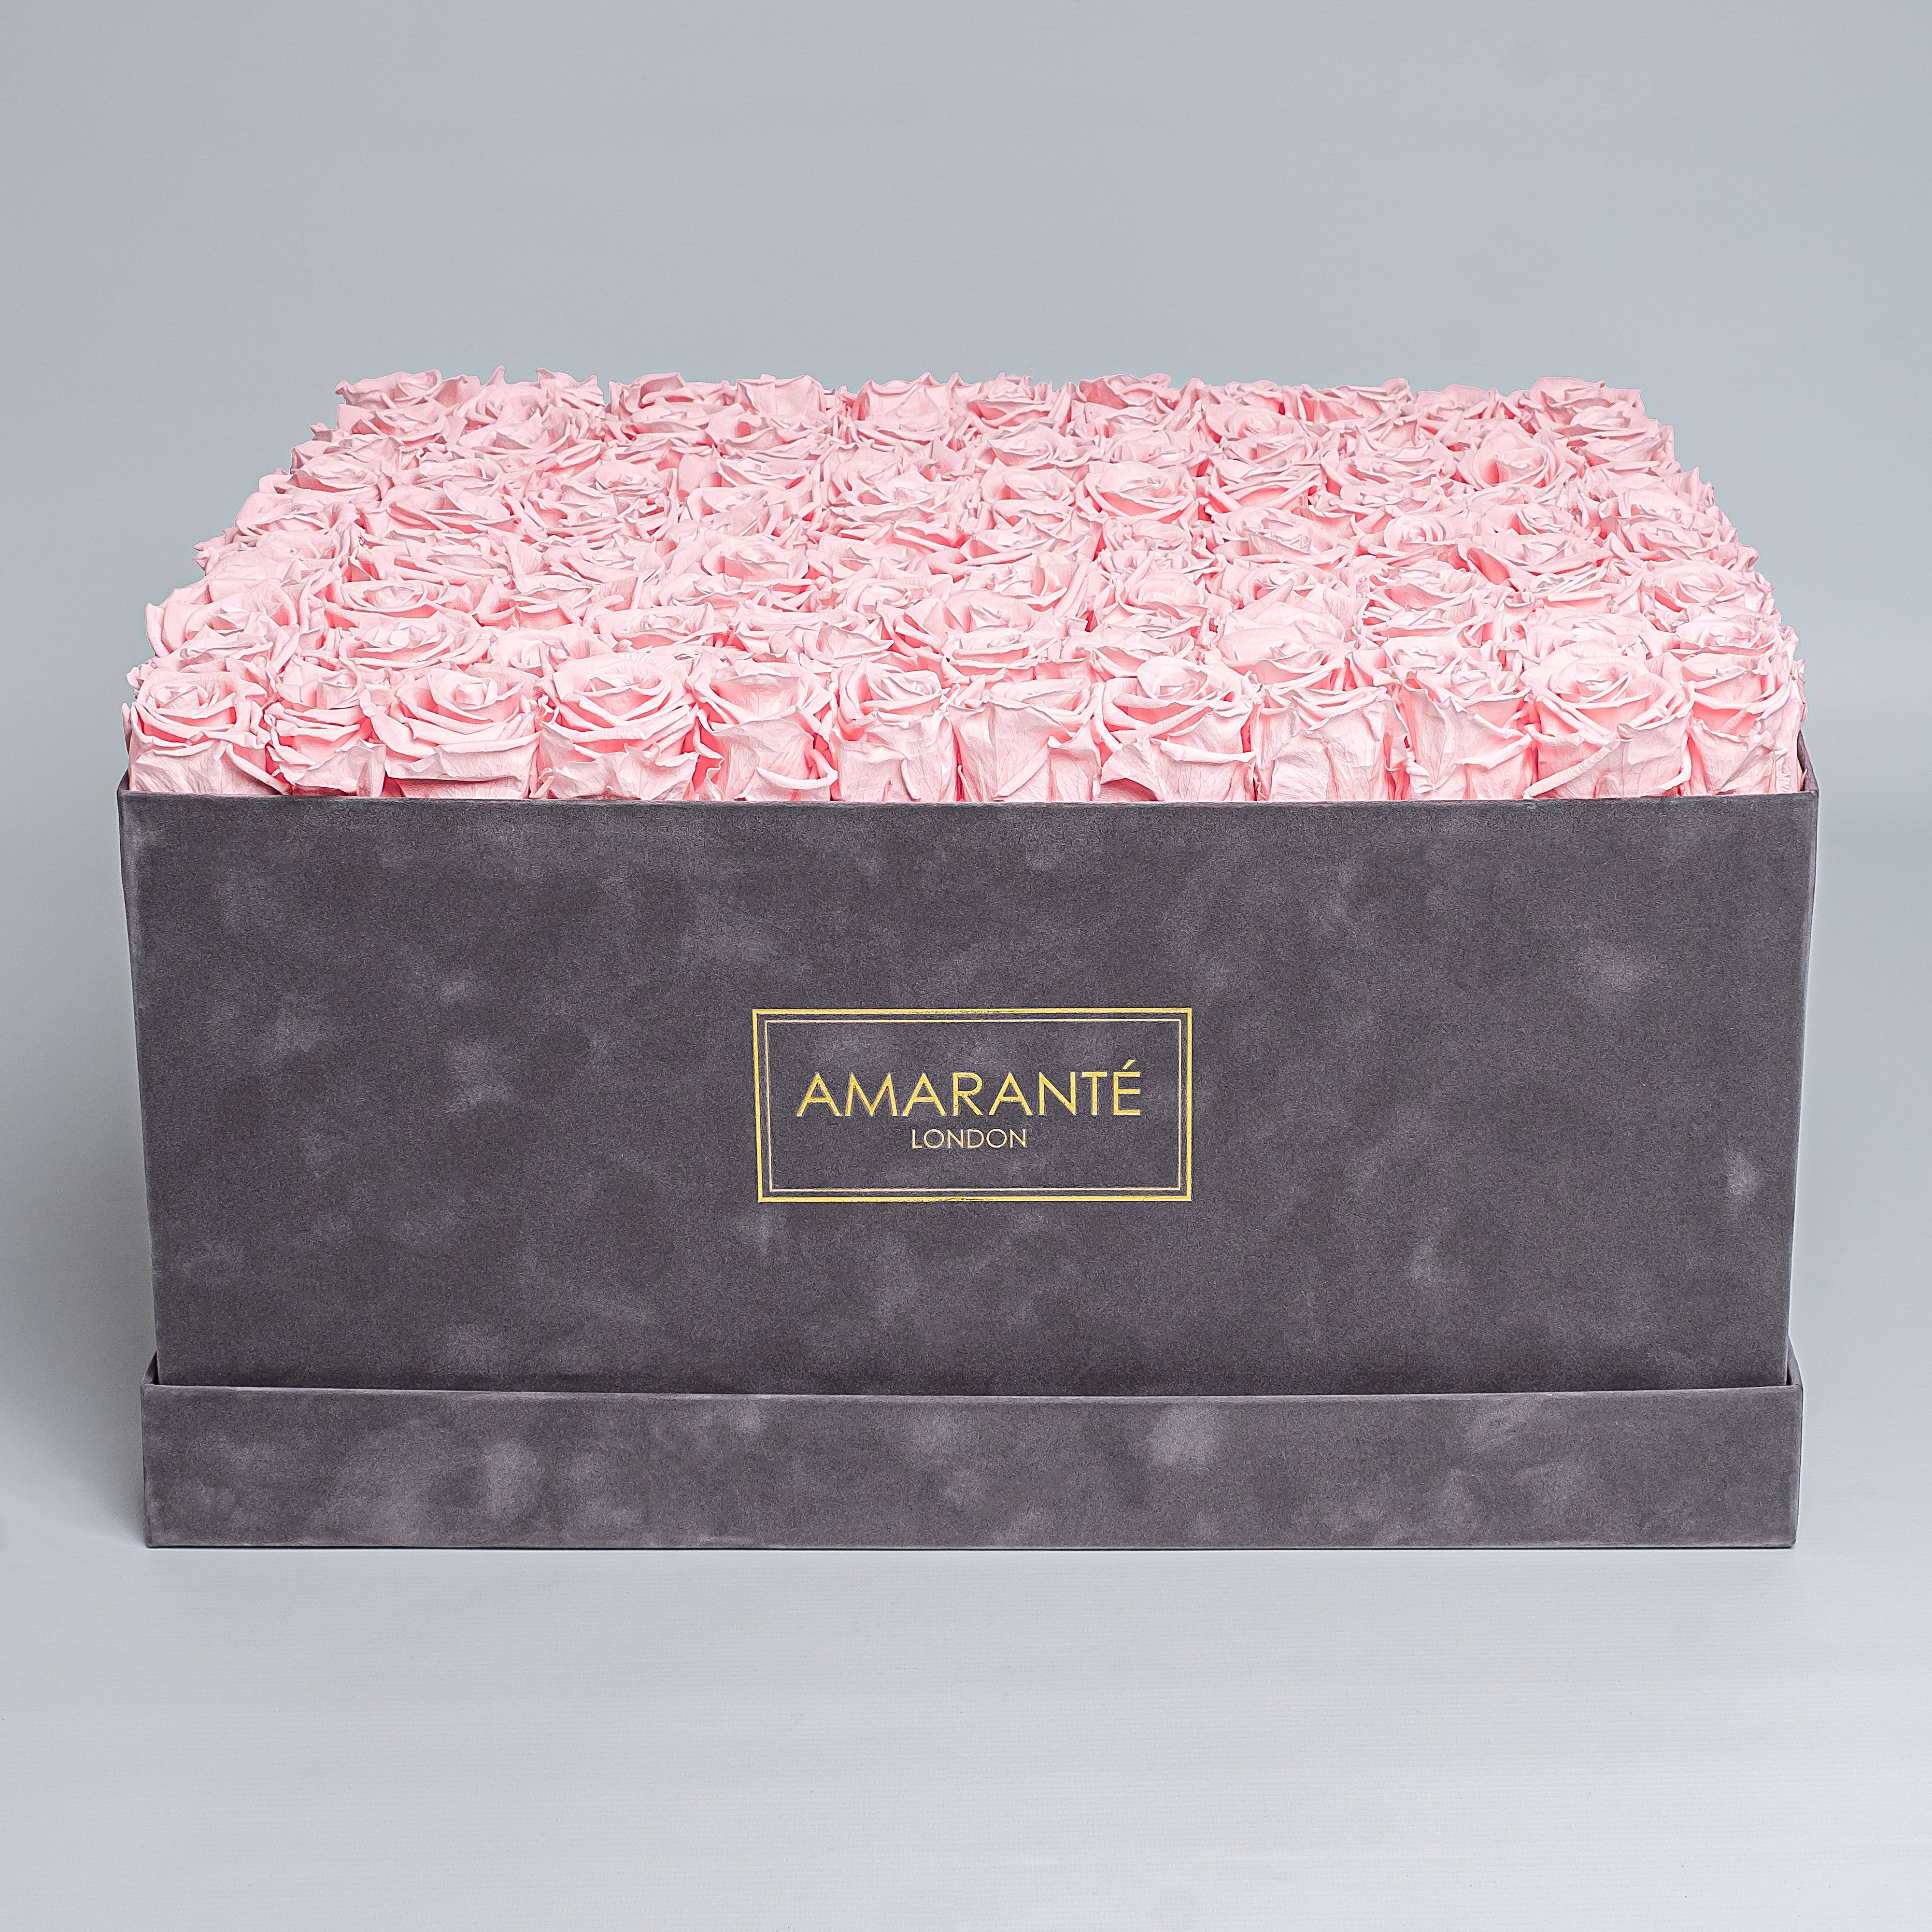 Luxurious super deluxe grey square rose box with a chic suede finish, brimming with 150 large pink infinity roses, a timeless expression of love, free UK delivery, 20"x20" rose box - Choose your roses from 14 delicate pastel colours.